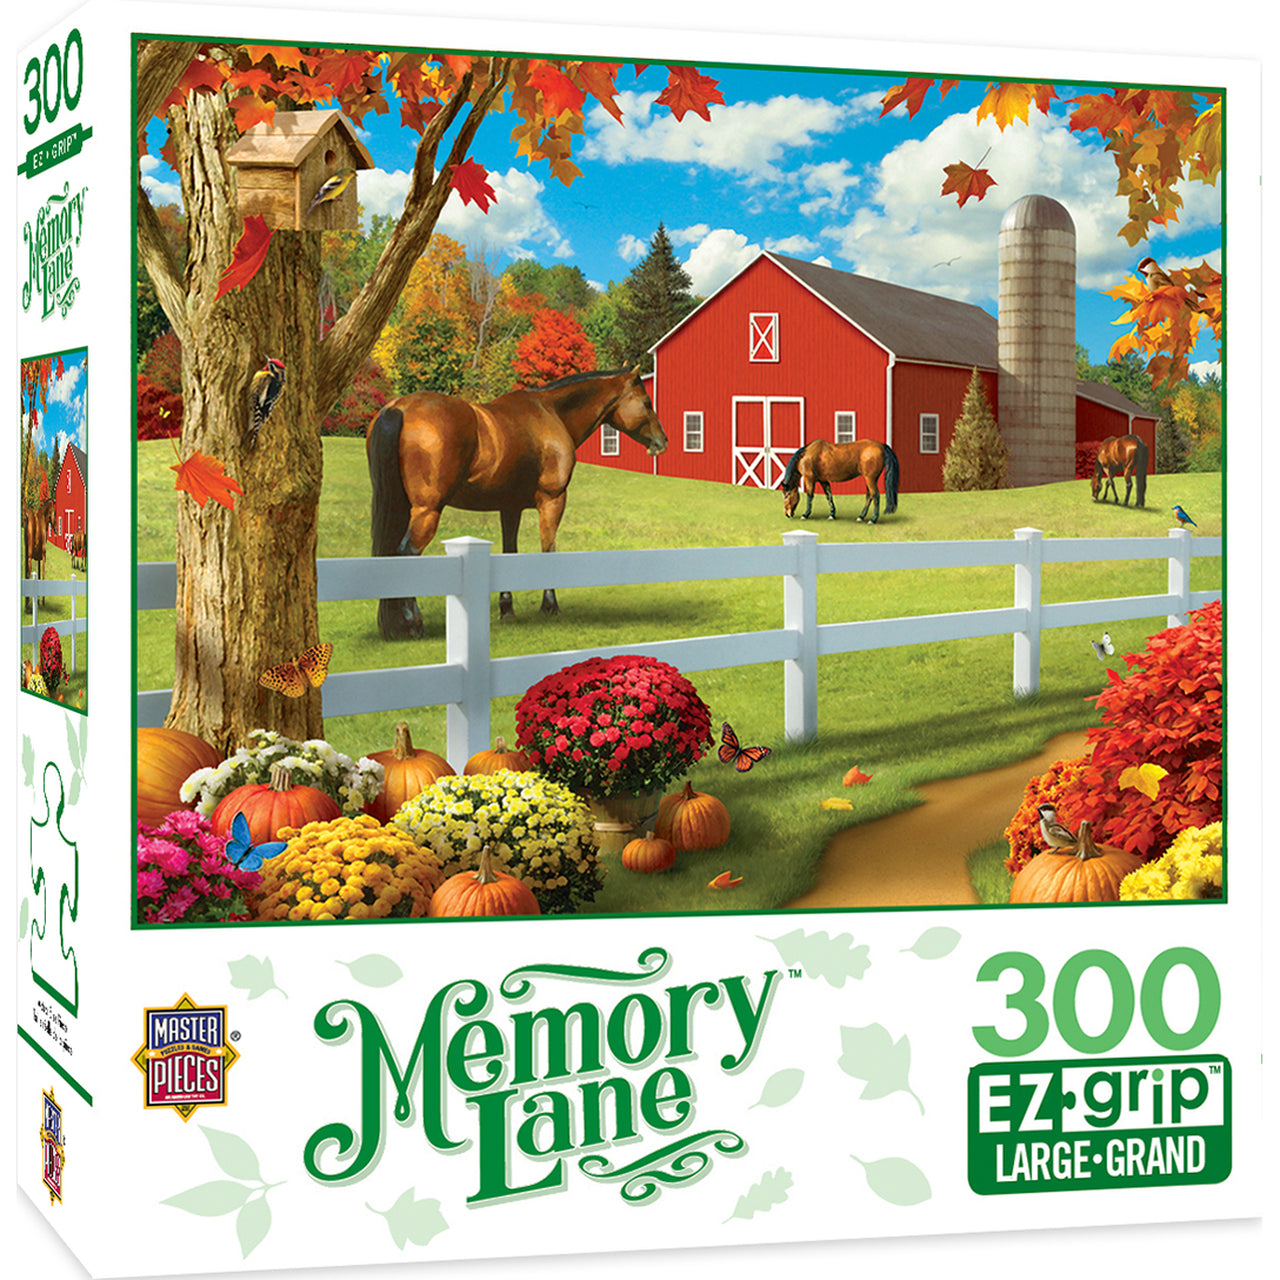 Memory Lane Rolling Pastures - Large 300 Piece EZGrip Jigsaw Puzzle by Masterpieces